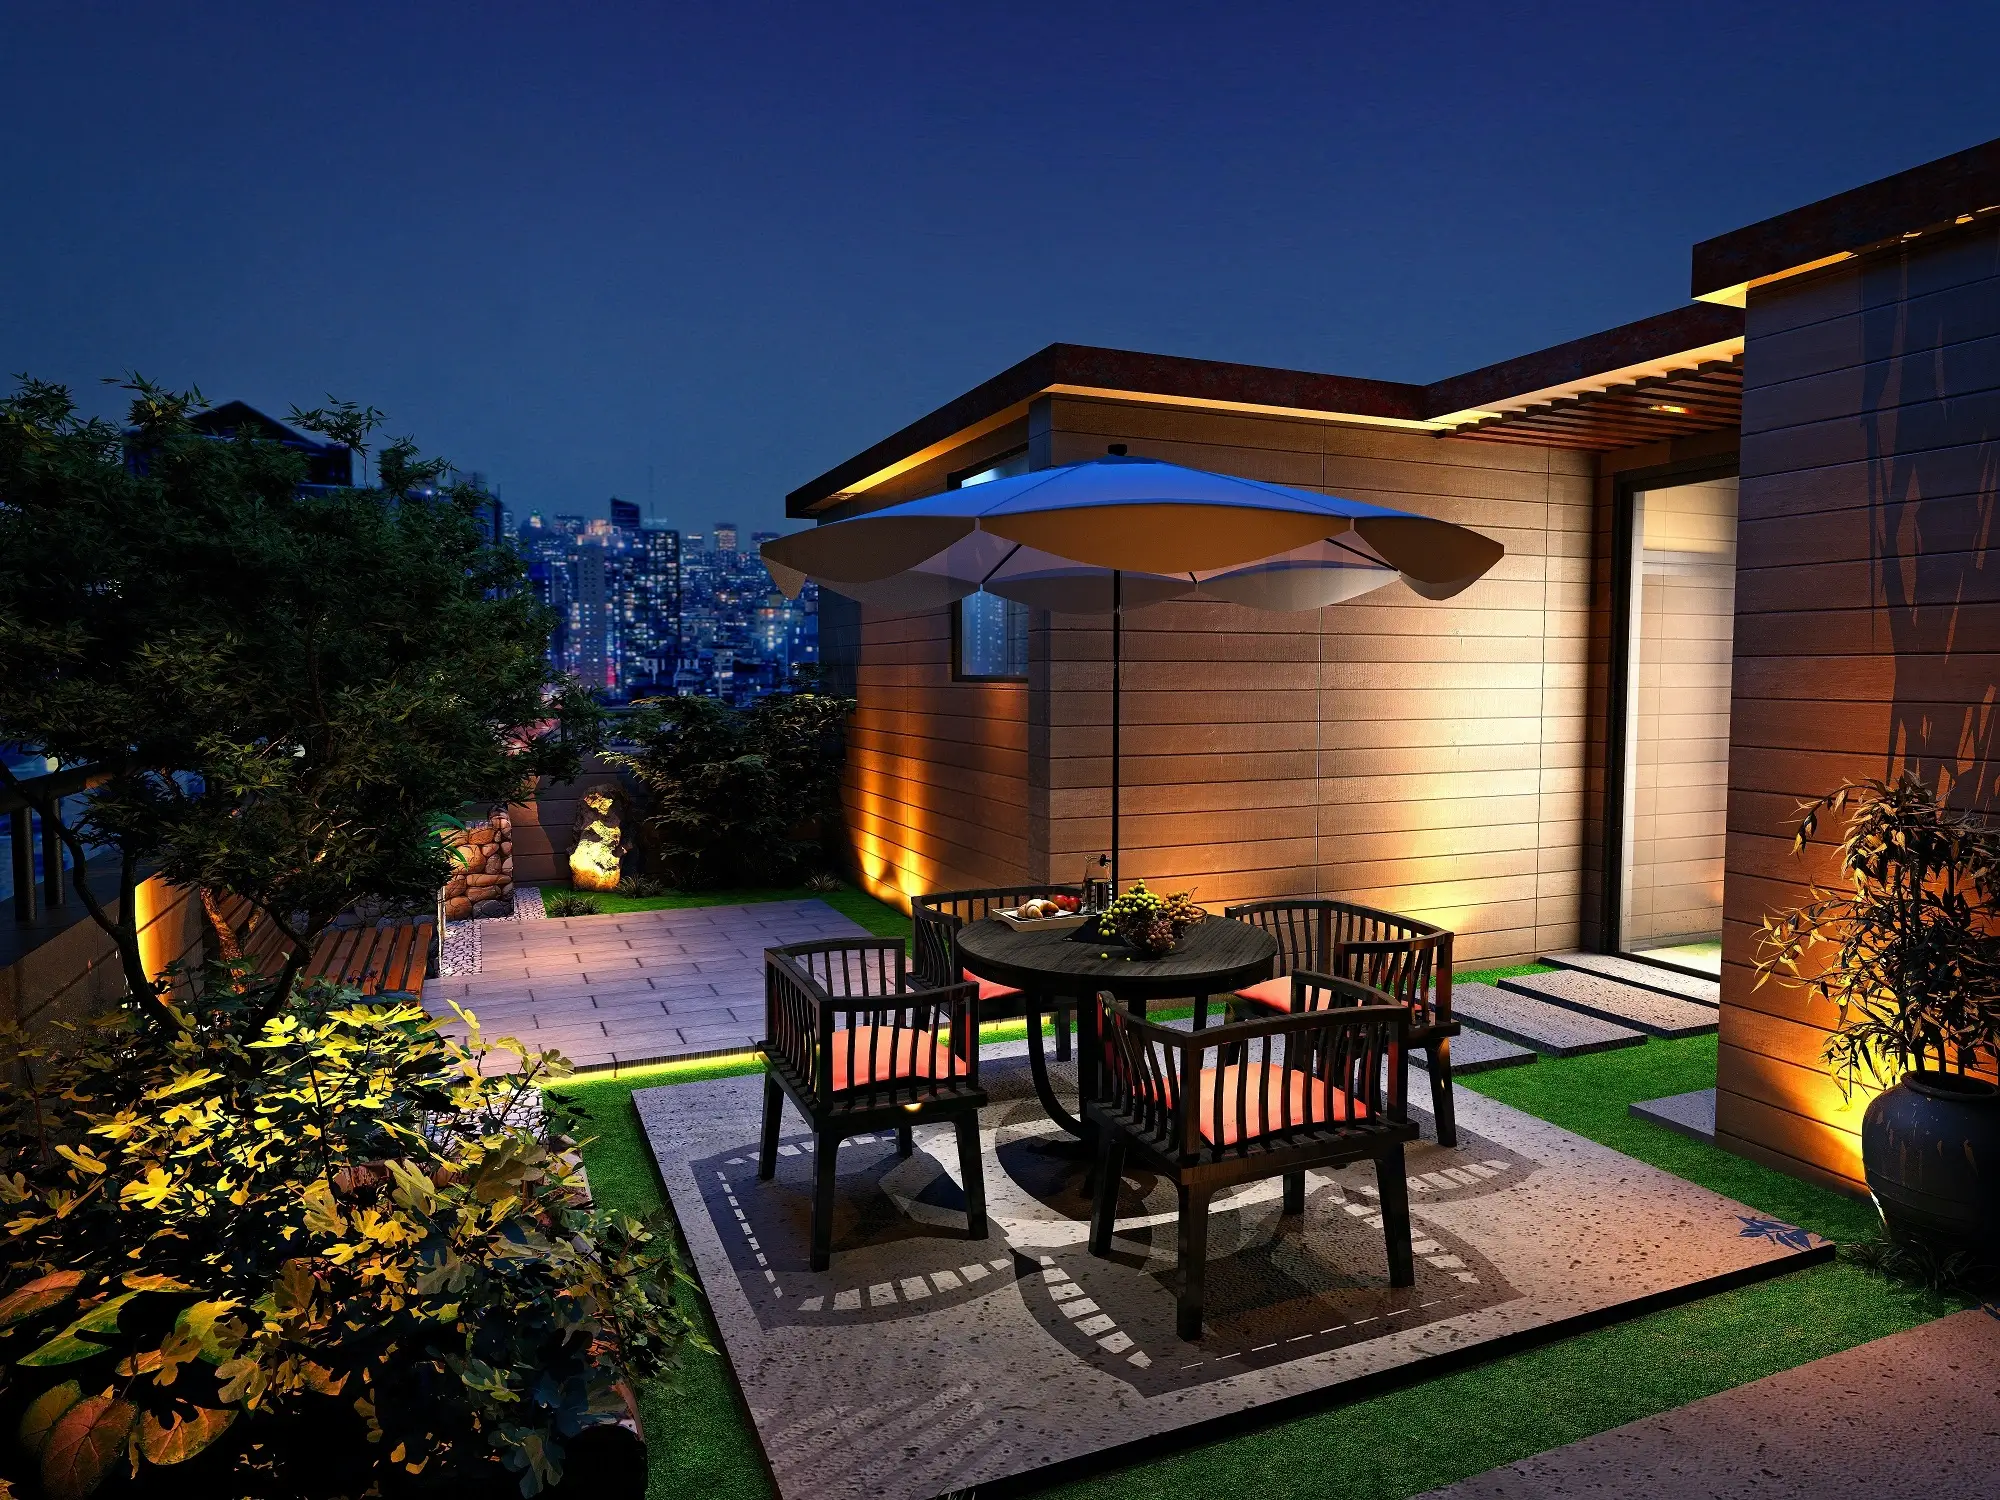 A 3D rendering of a house's terrace illuminated by night lights, representing the concept of trust resettlement.